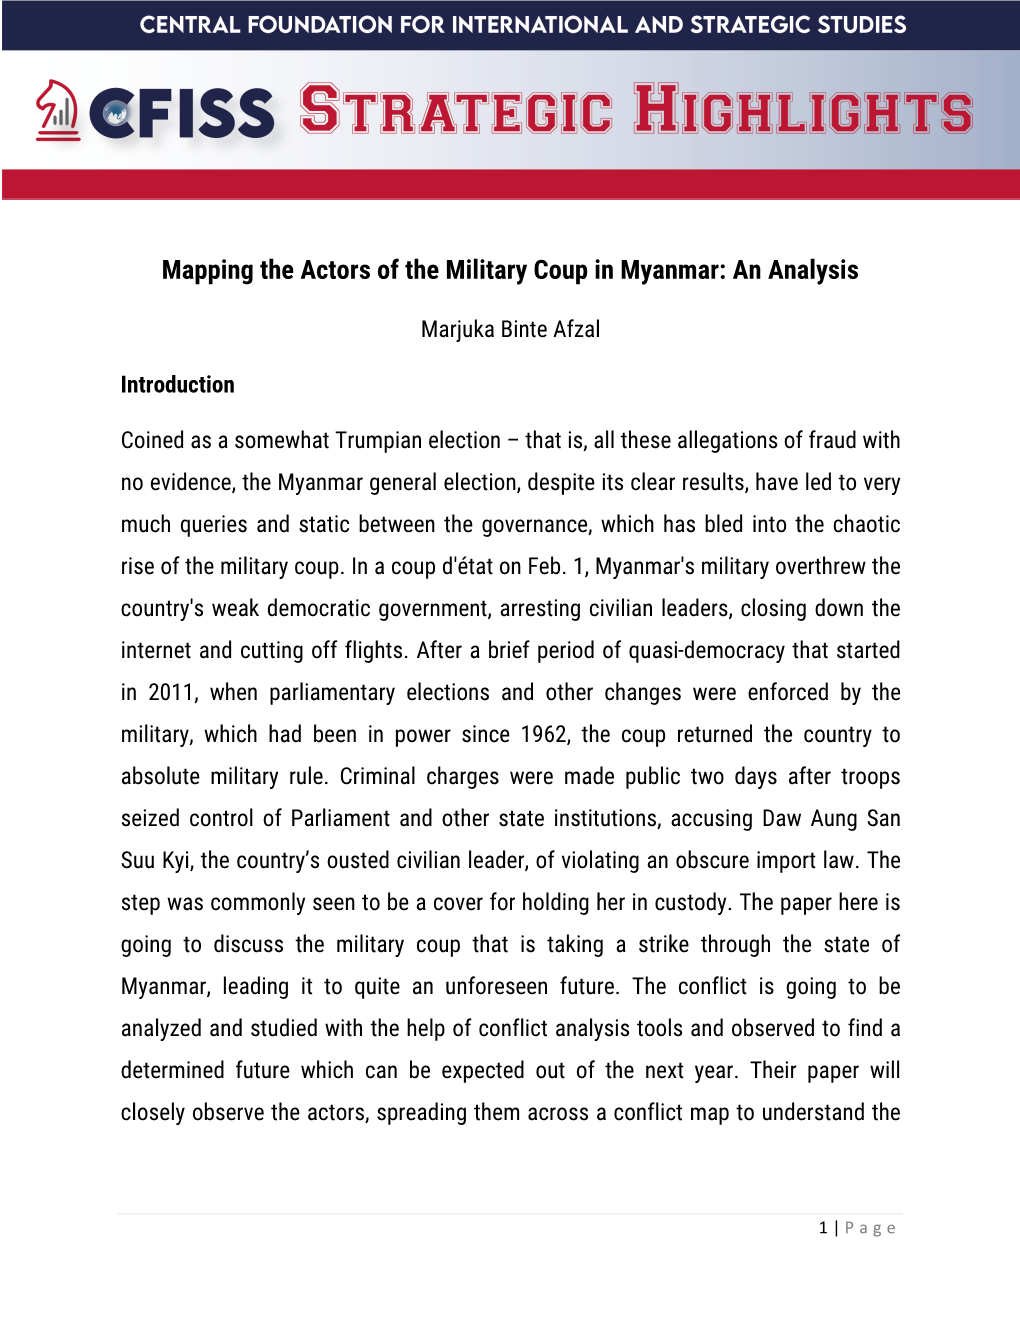 Mapping the Actors of the Military Coup in Myanmar: an Analysis